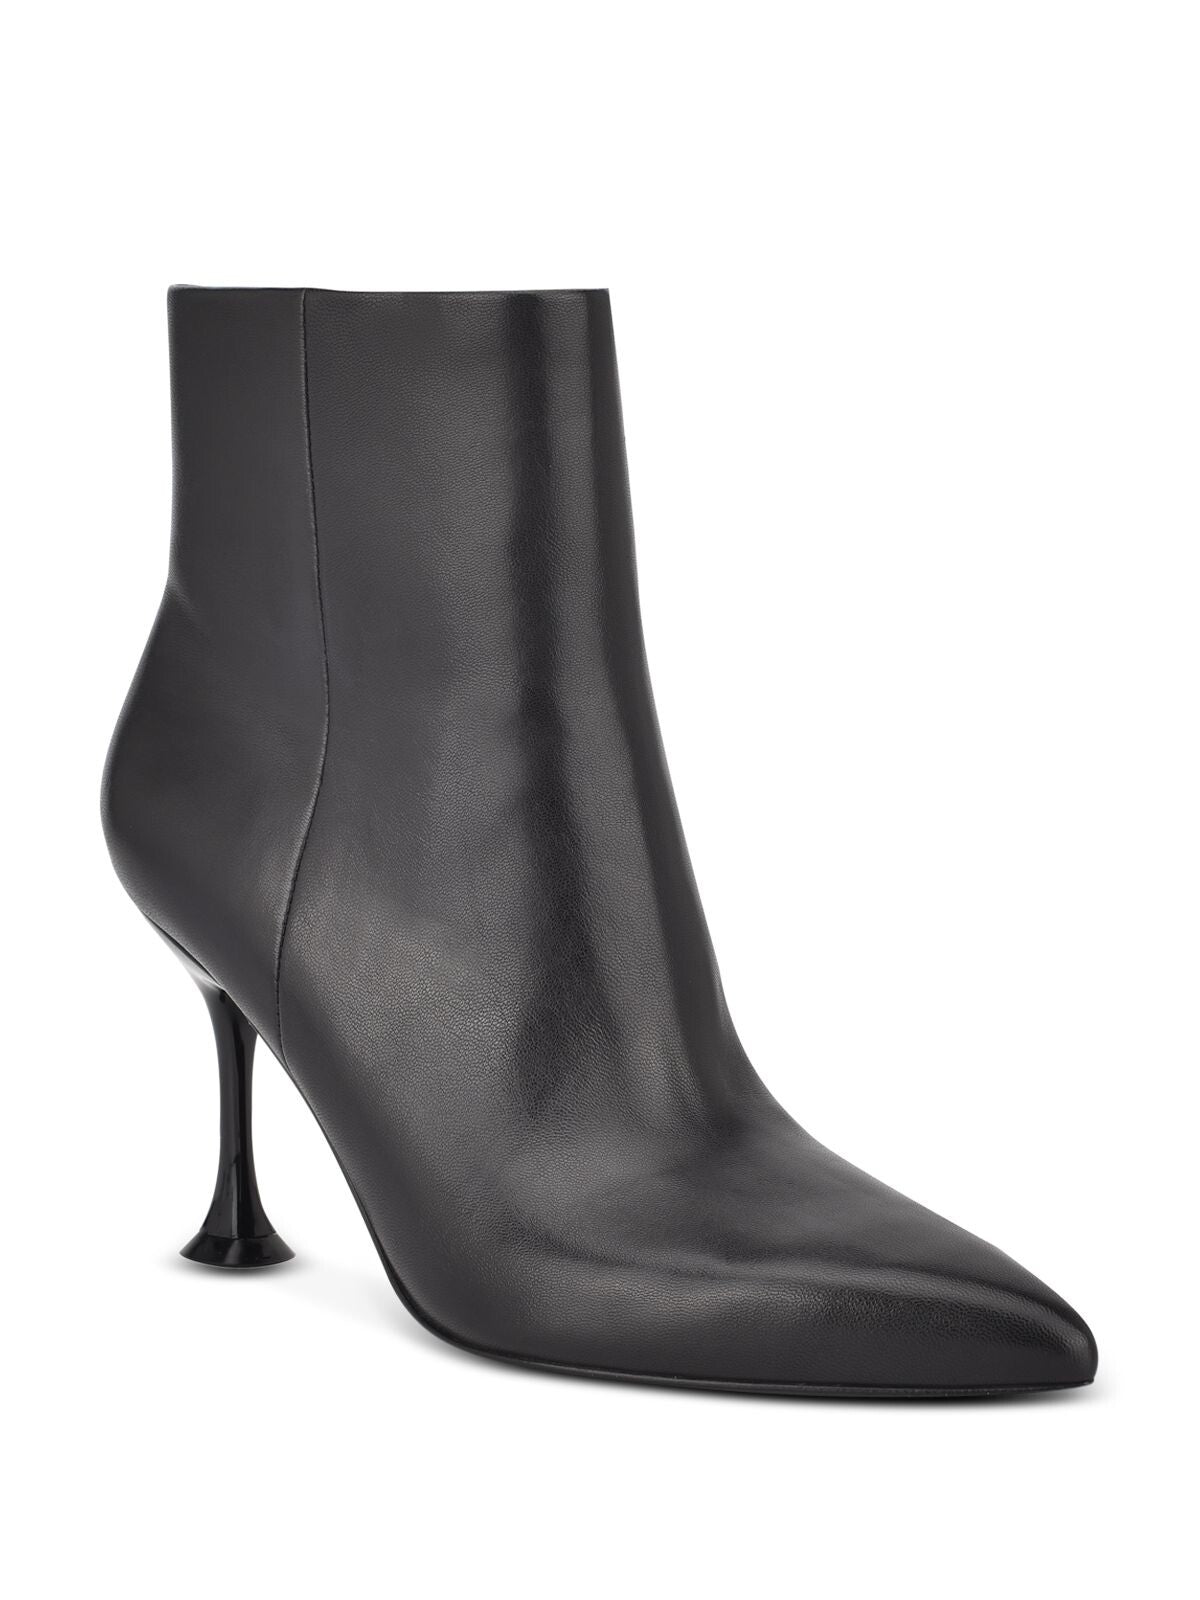 SIGERSON MORRISON Womens Black Zigy Pointed Toe Sculpted Heel Zip-Up Leather Dress Boots 39.5